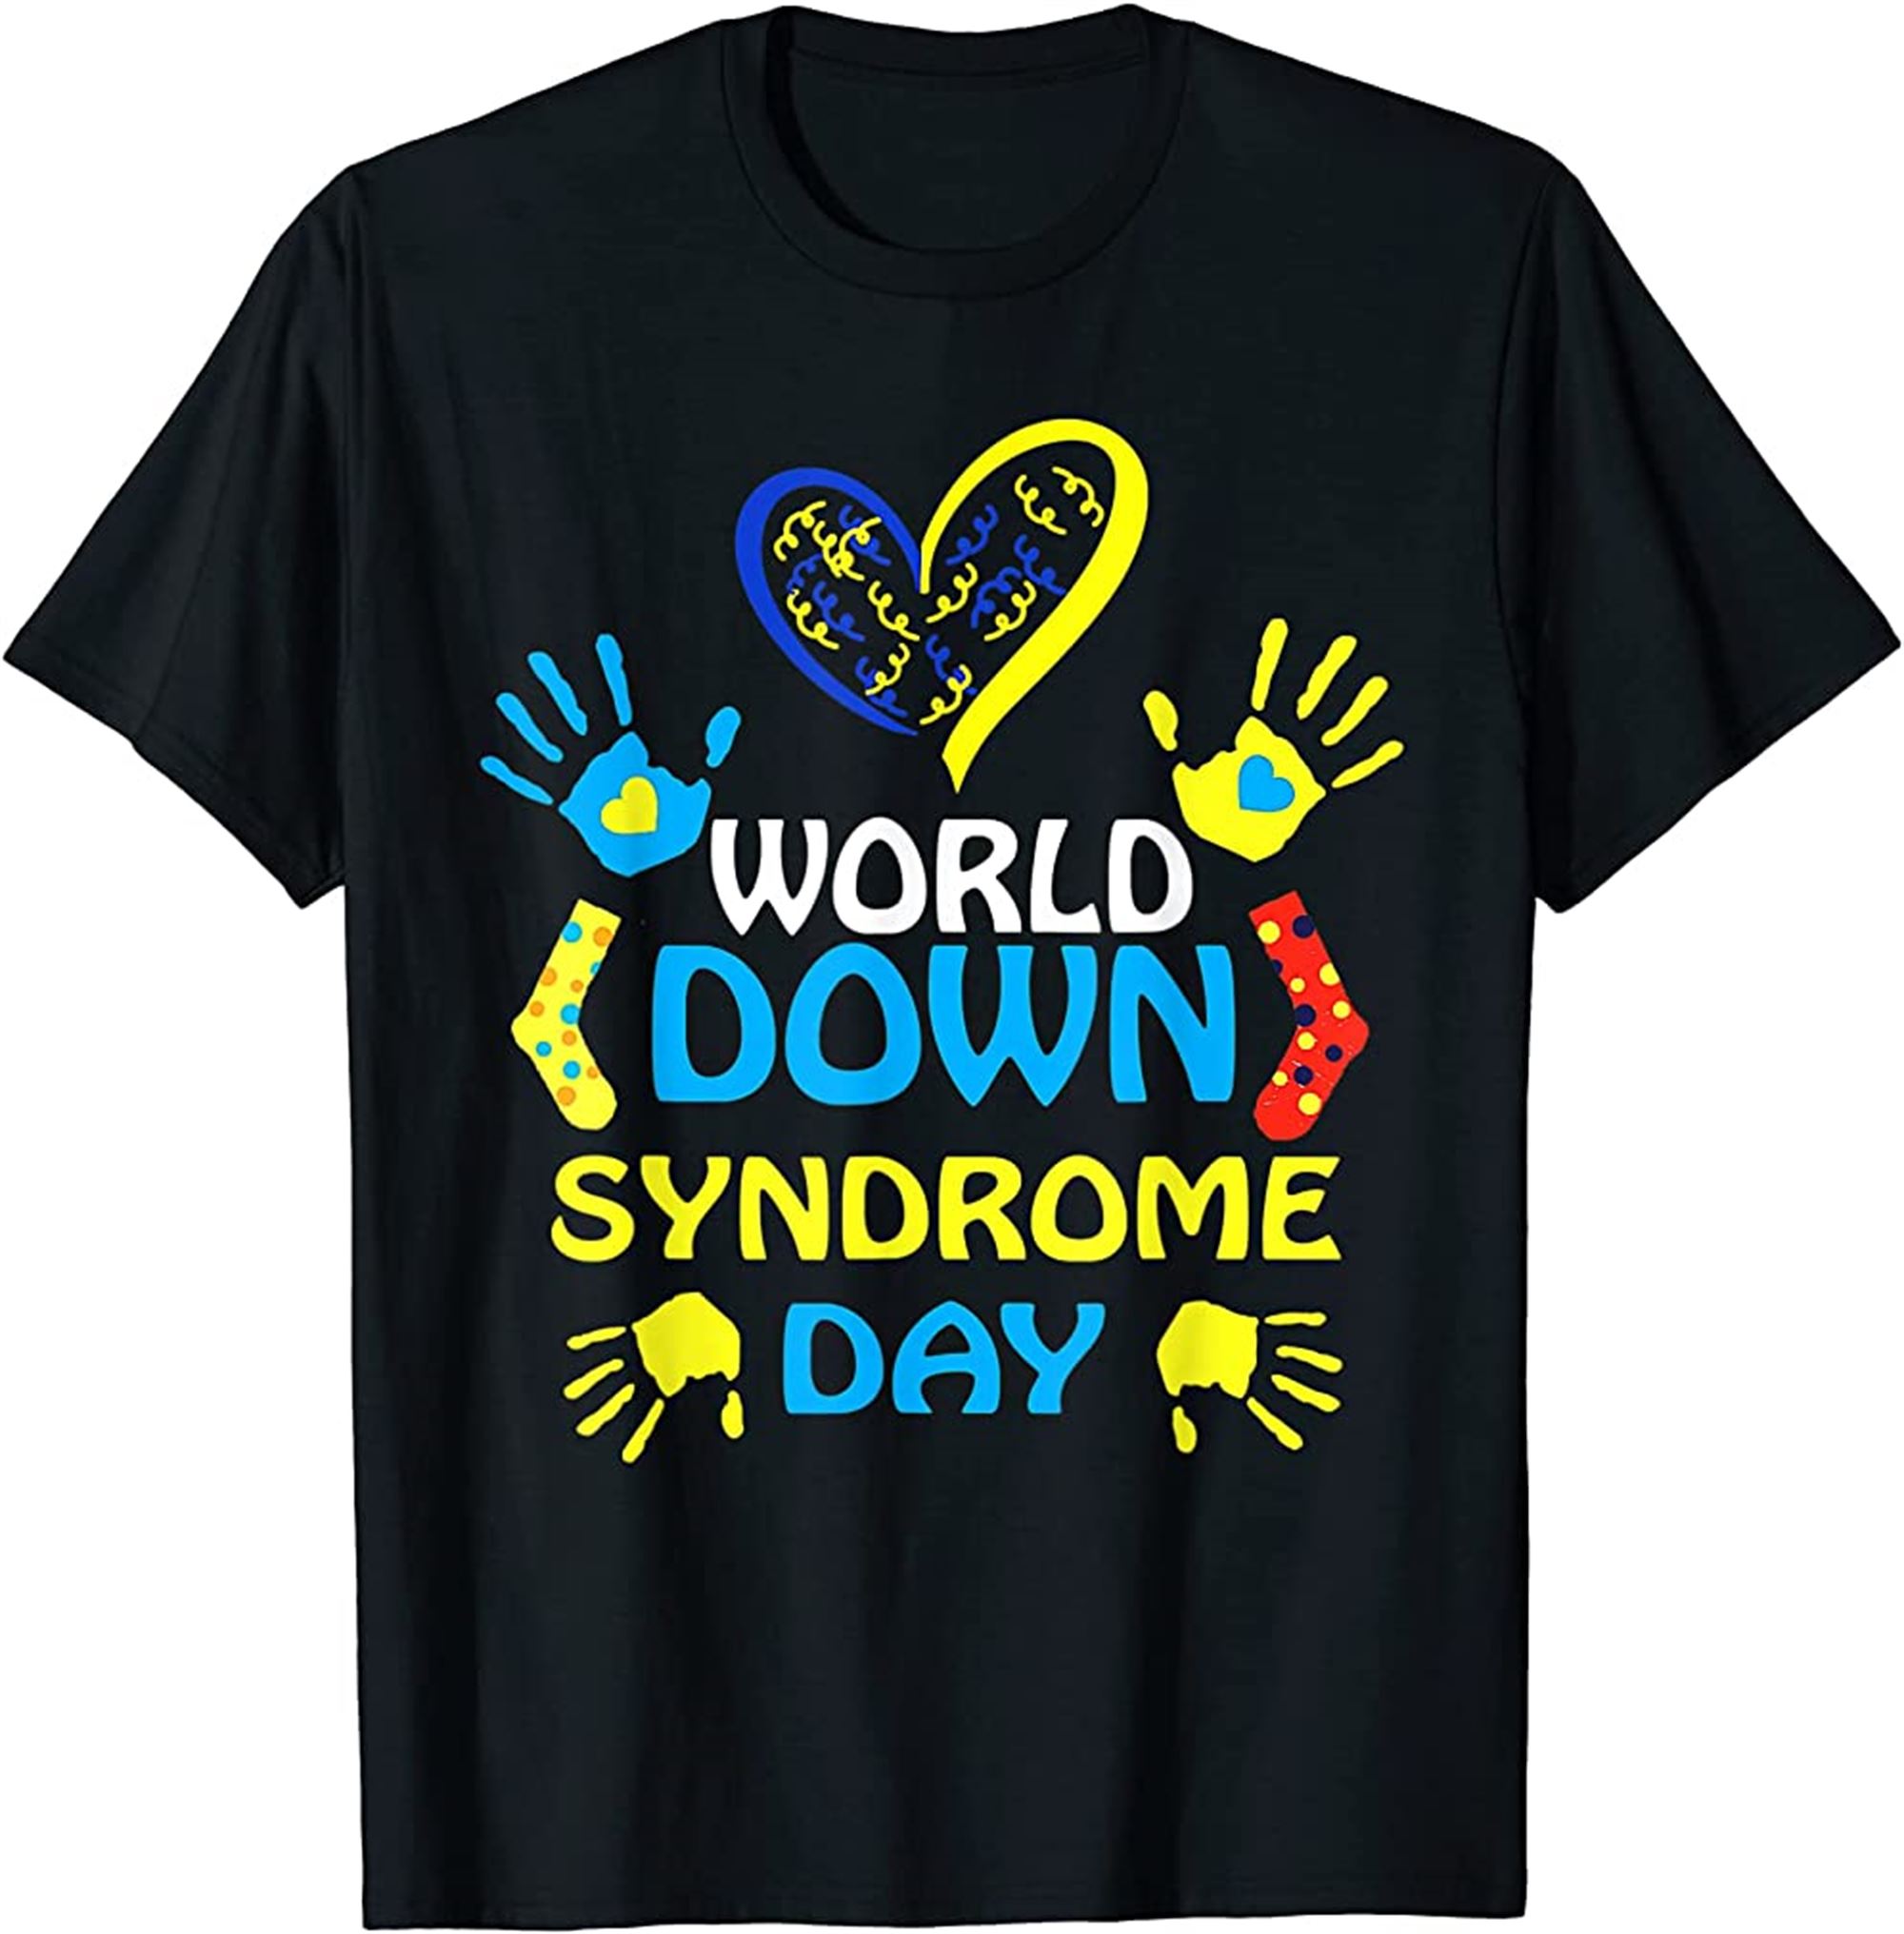 World Down Syndrome Day Tshirt Support And Awareness 321 Tshirt Plus Size Up To 5xl